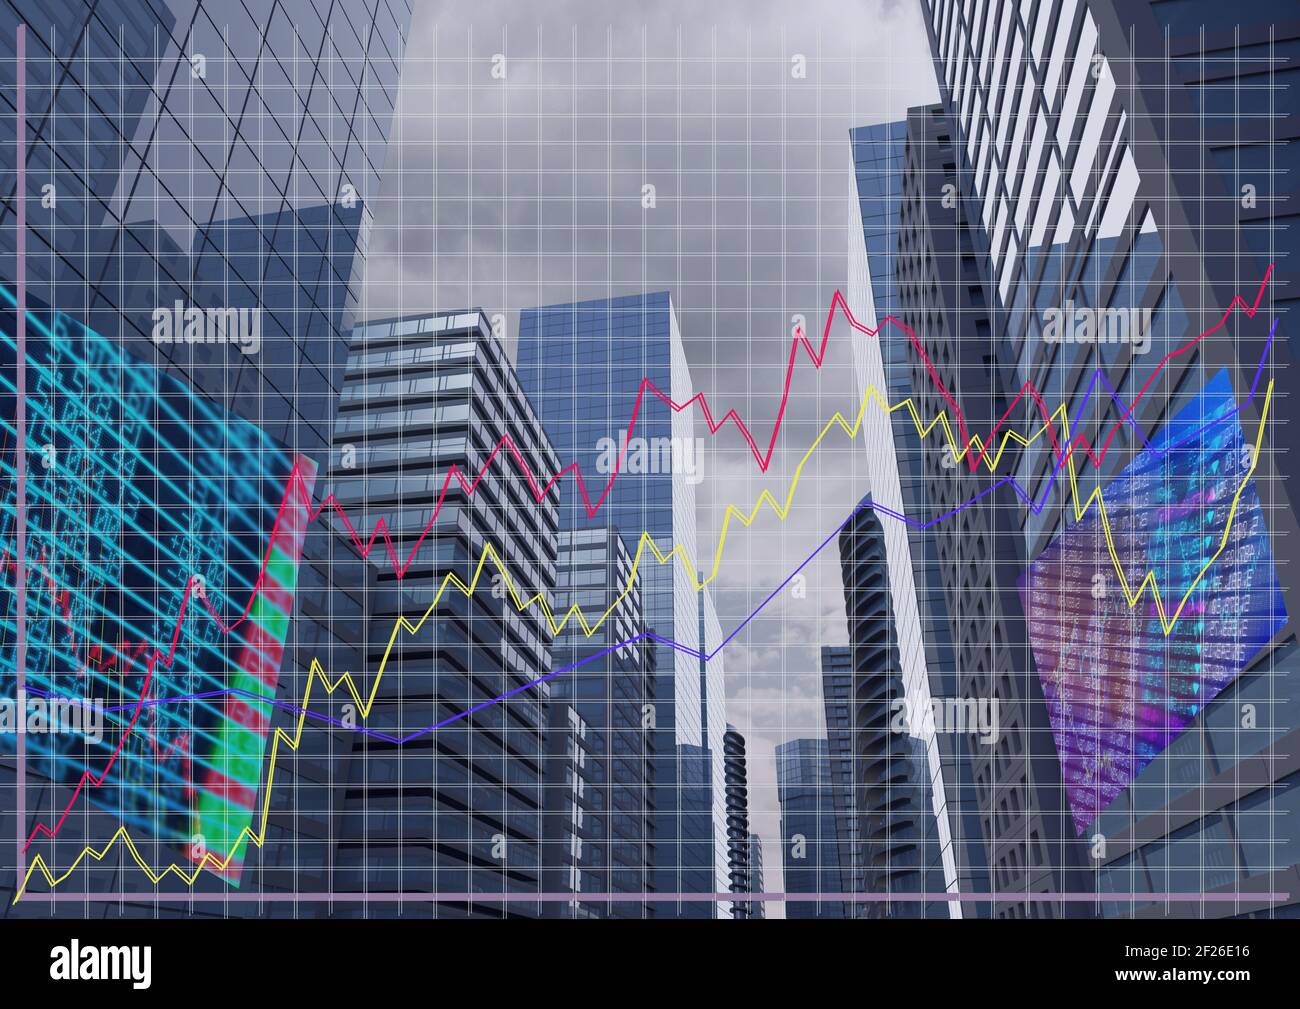 Multiple graphs over stock market data processing against tall buildings Stock Photo